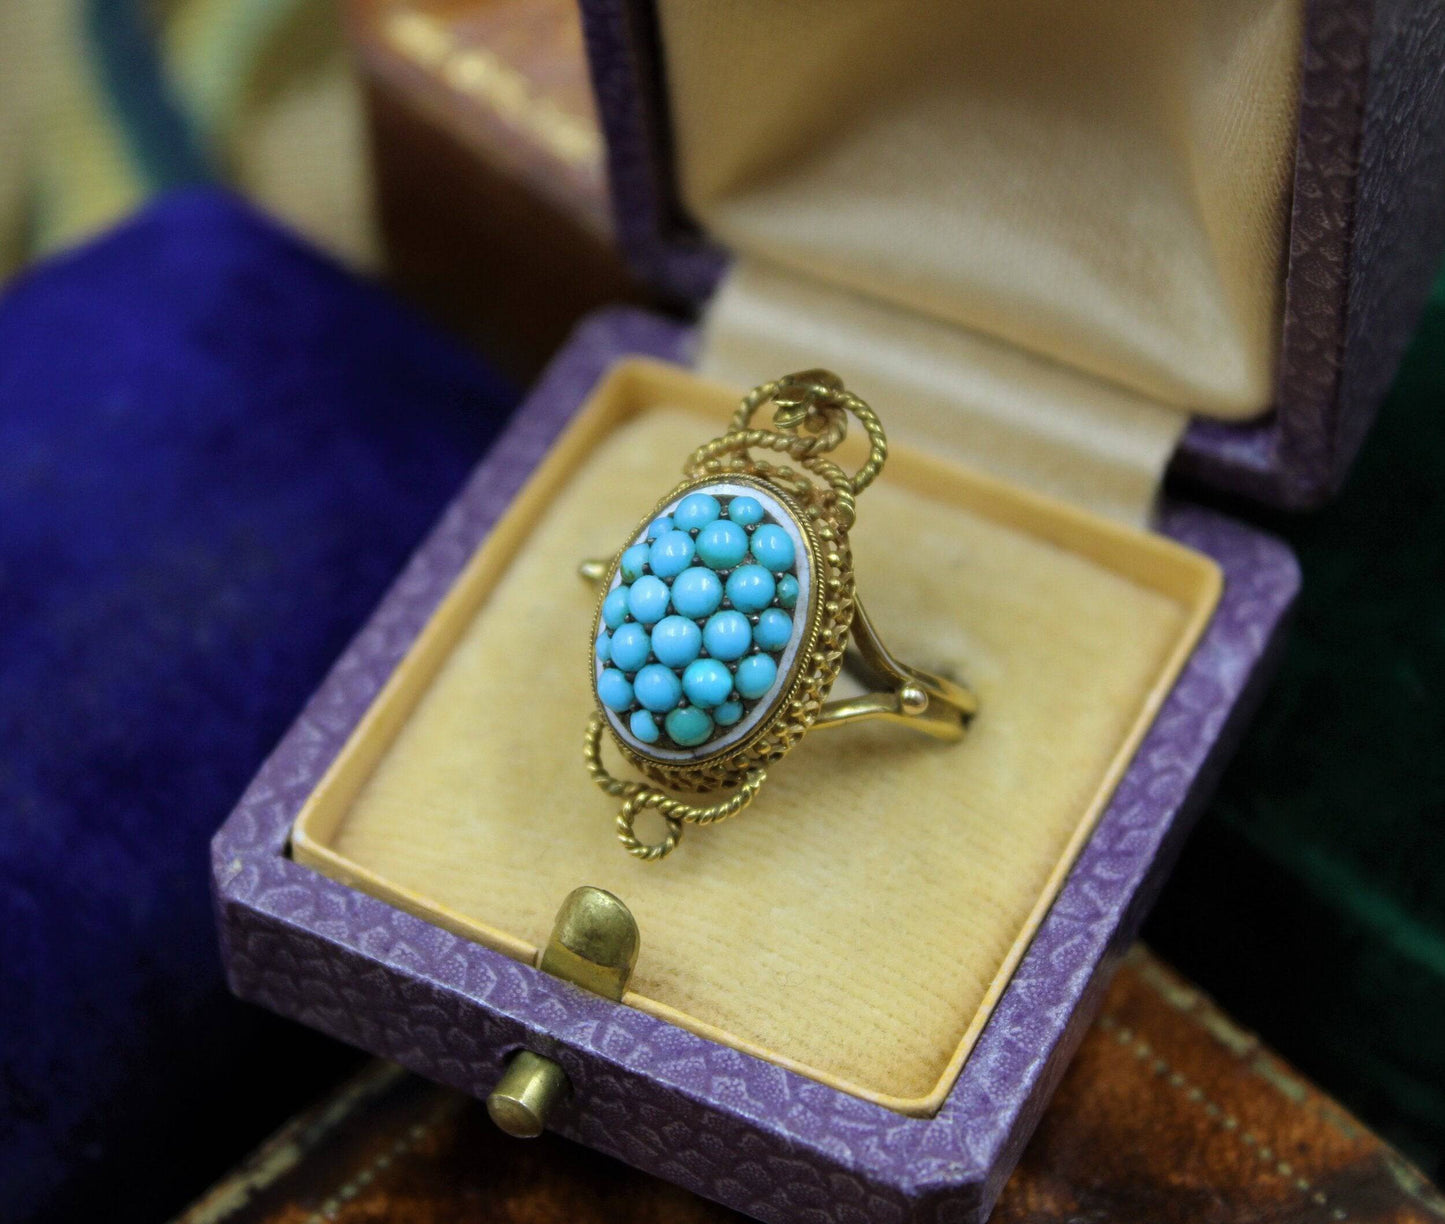 A very fine Victorian Turquoise Serpentine Cluster Ring set in 18ct Yellow Gold, English, Circa 1880 - Robin Haydock Antiques